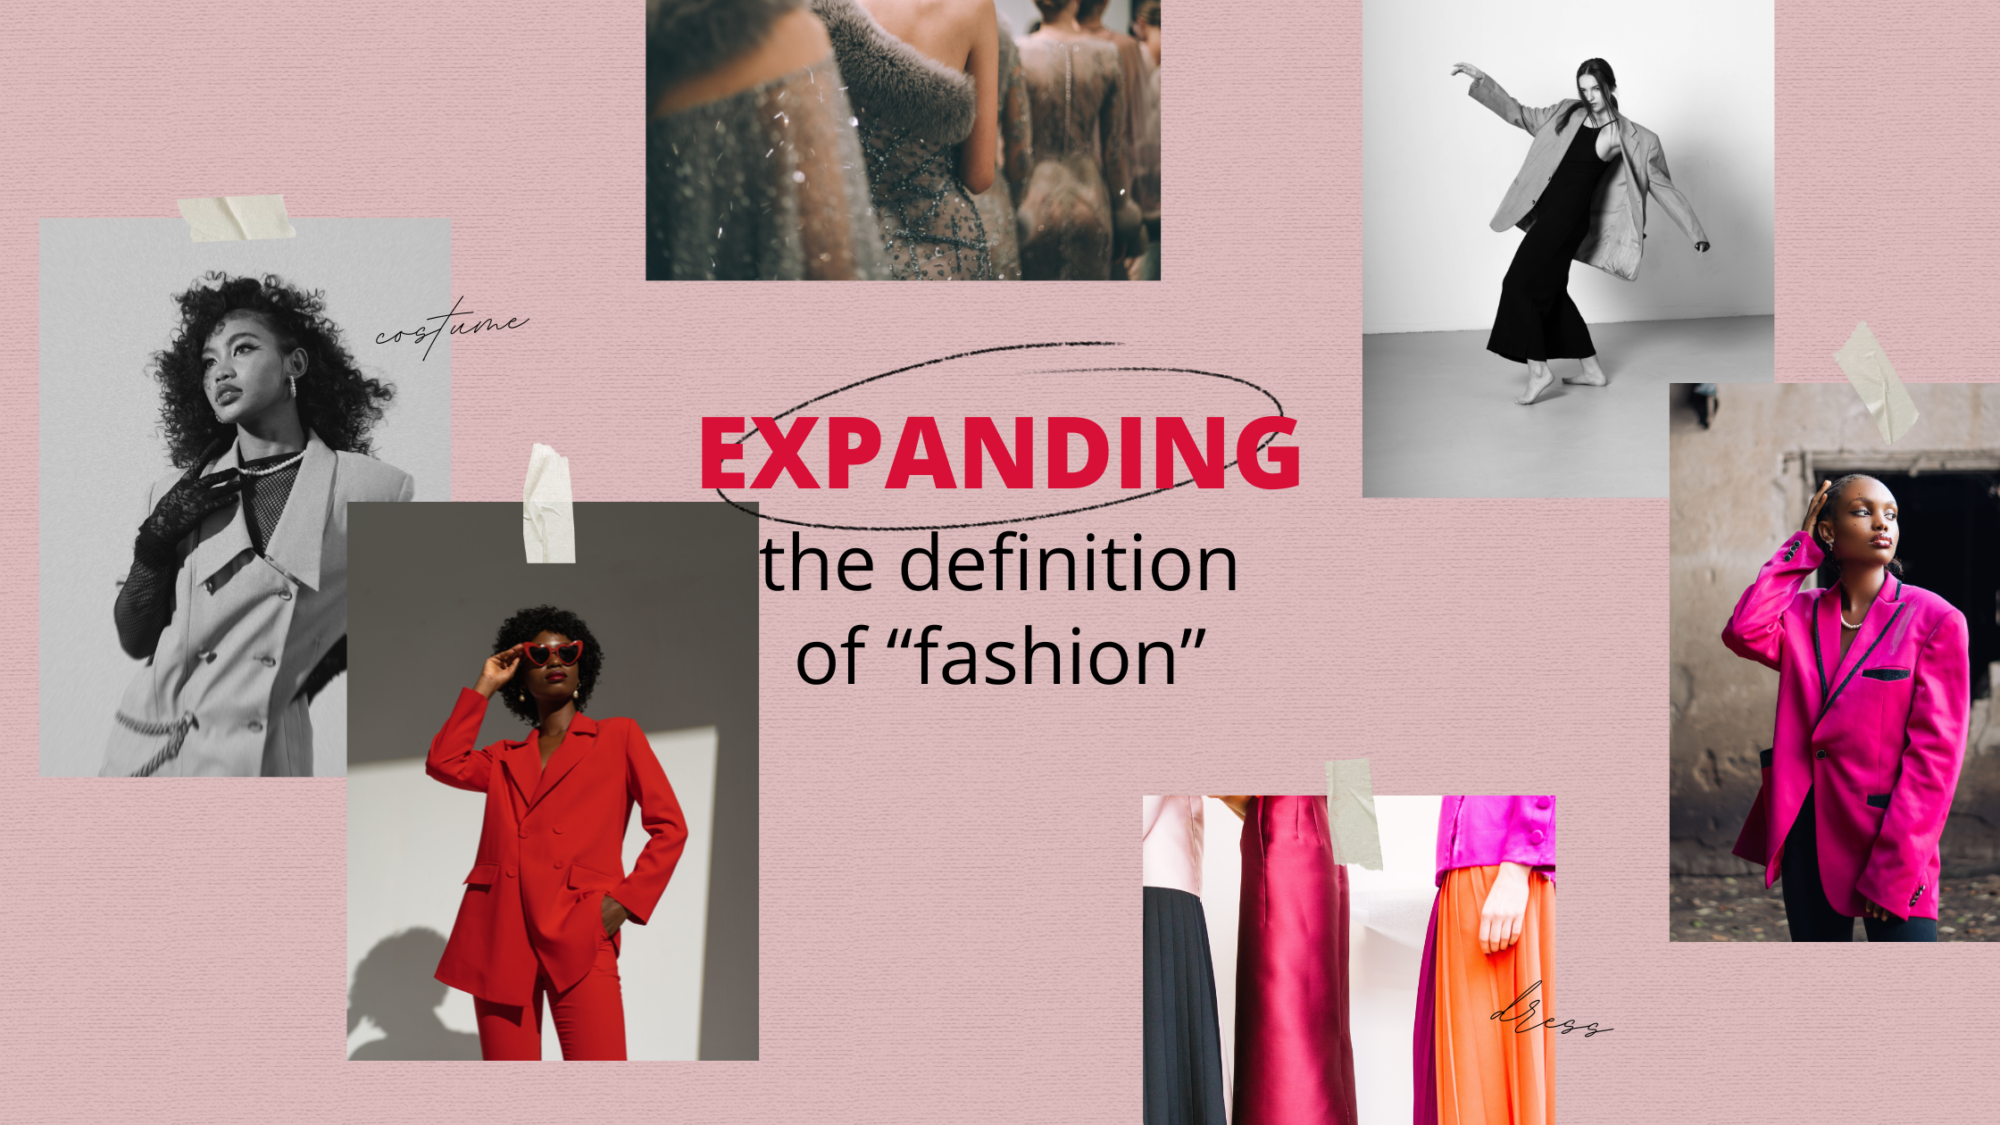 Decorative image for blog with the article's title: "Expanding the definition of fashion" and a collage of editorial fashion photos.